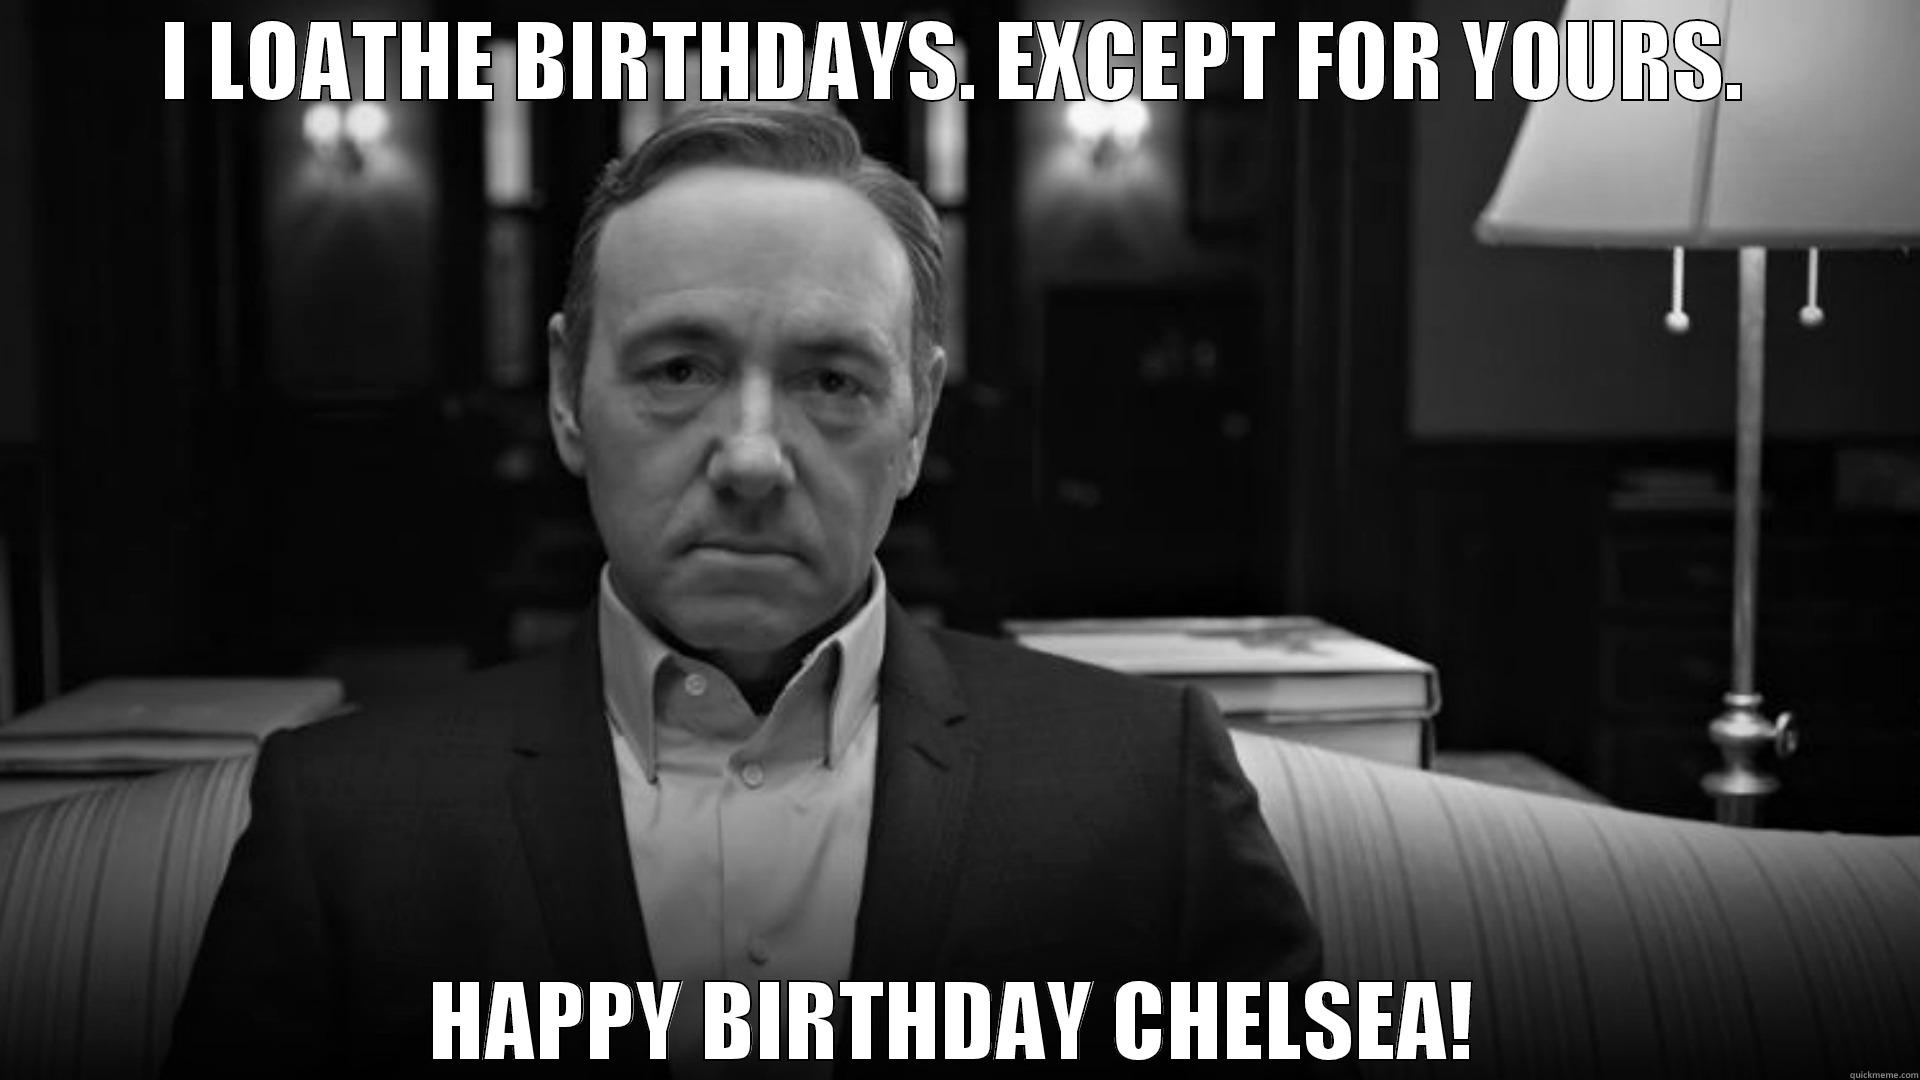 House of Cards Birthday Wishes - I LOATHE BIRTHDAYS. EXCEPT FOR YOURS. HAPPY BIRTHDAY CHELSEA! Misc